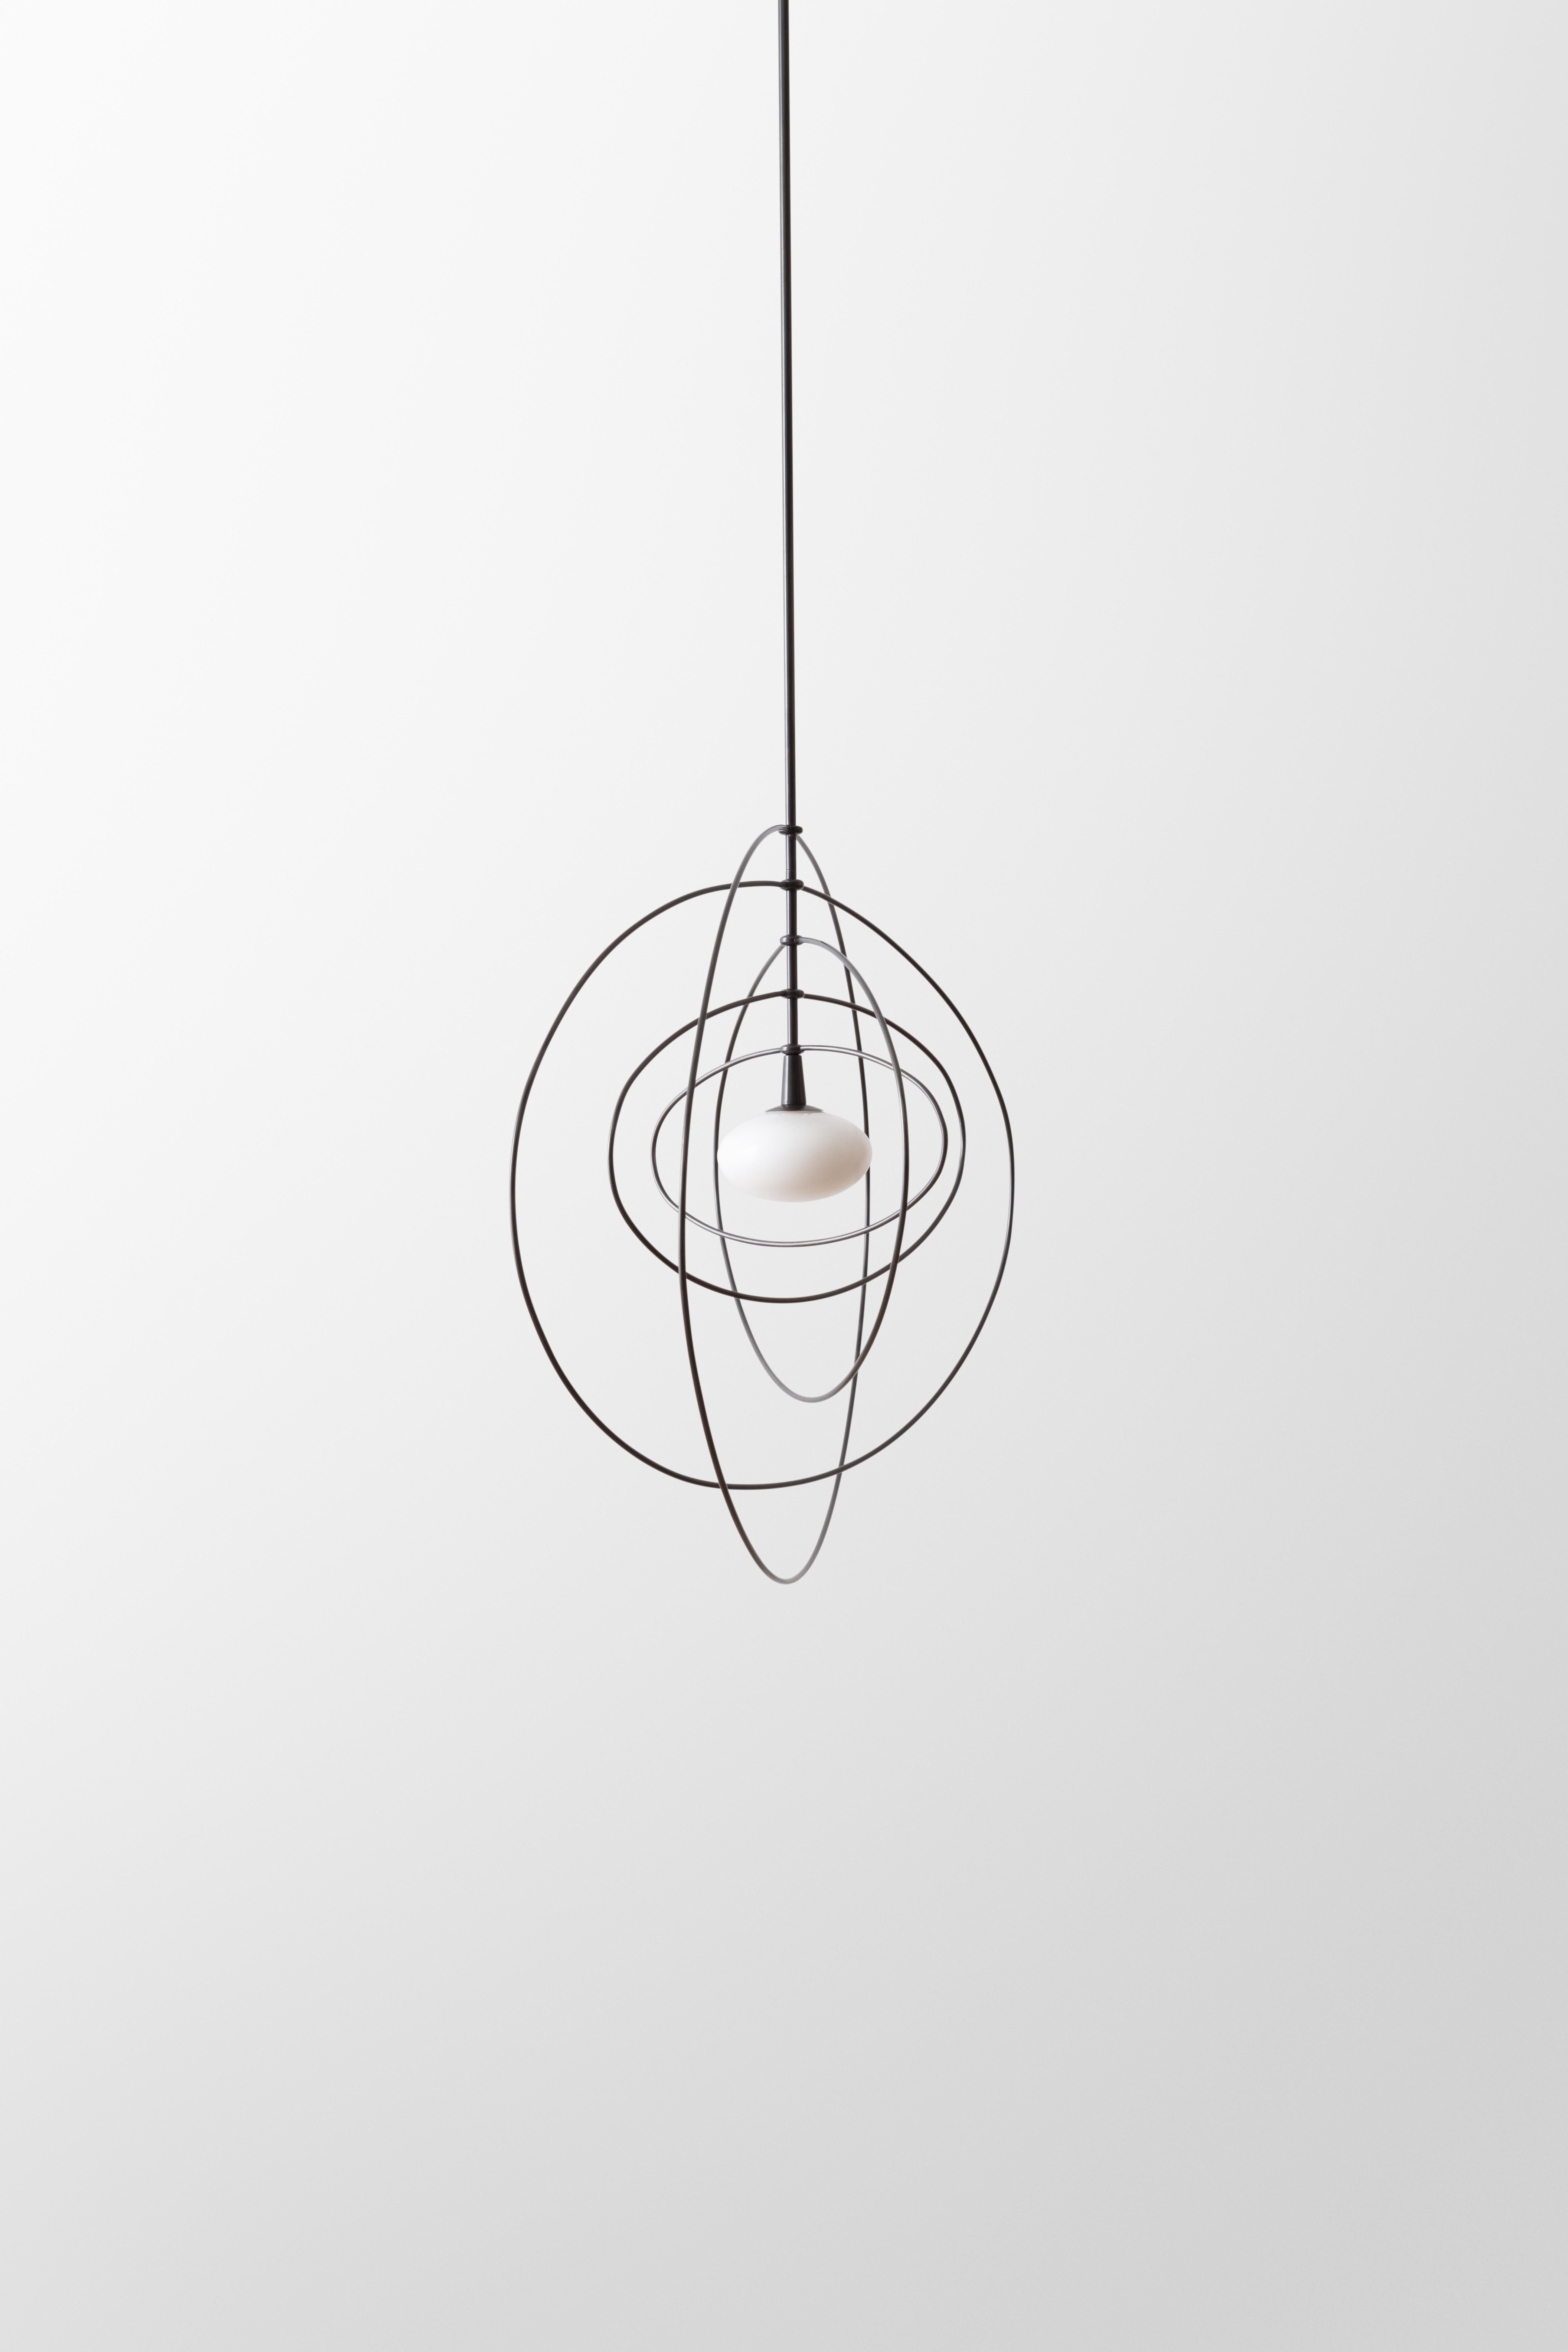 North American Ellipse Mobile Pendant LED Kinetic Sculpture with Blown Glass and Brass Rings For Sale